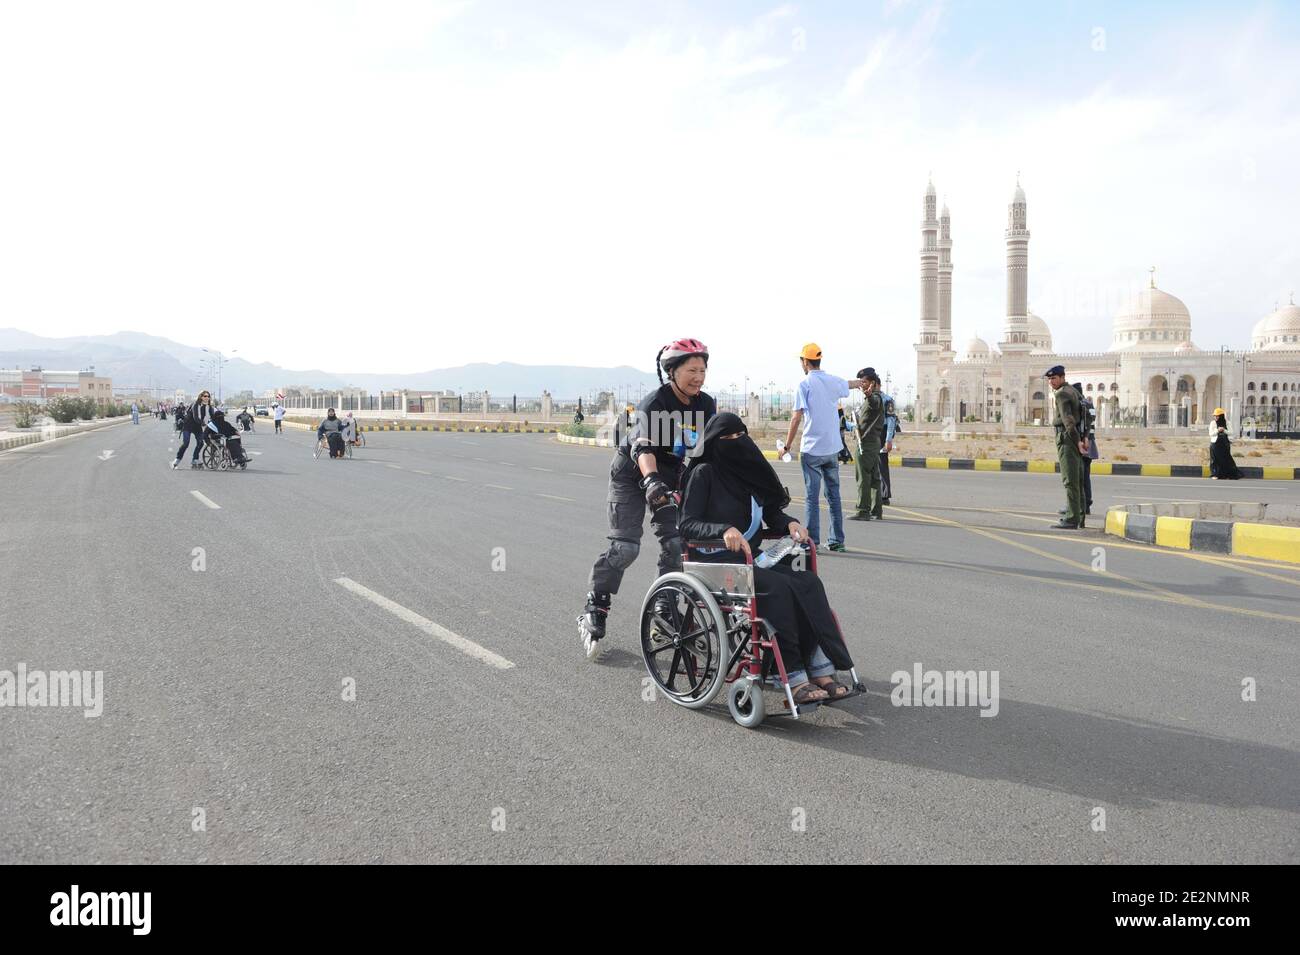 French rollerbladers seen skating with Yemenite disabled people, in a rallye around the 'Al-Saleh' mosque in Sana'a, Yemen, on February 28, 2010. Yemen is seen as a 'dangerous' country, with terrorism threat for westerners. The event was meant to draw attention to Yemenite disabled special needs, and ask for laws to support them. Photo by Ammar Abd Rabbo/ABACAPRESS.COM Stock Photo